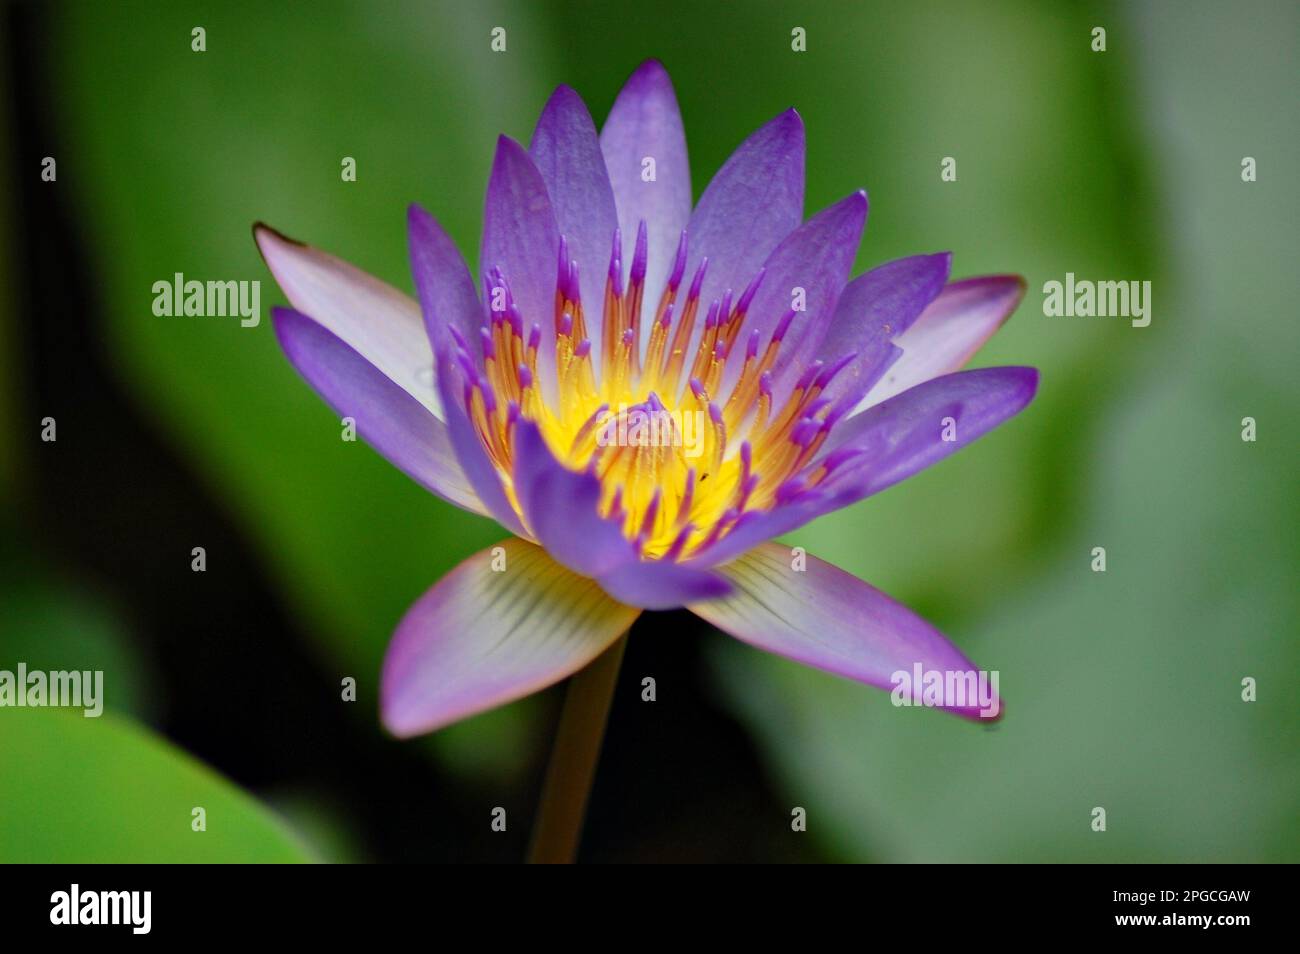 Nymphaea Flower, violet Nymphaea from Thailand, close up macro nature, bokeh background Stock Photo